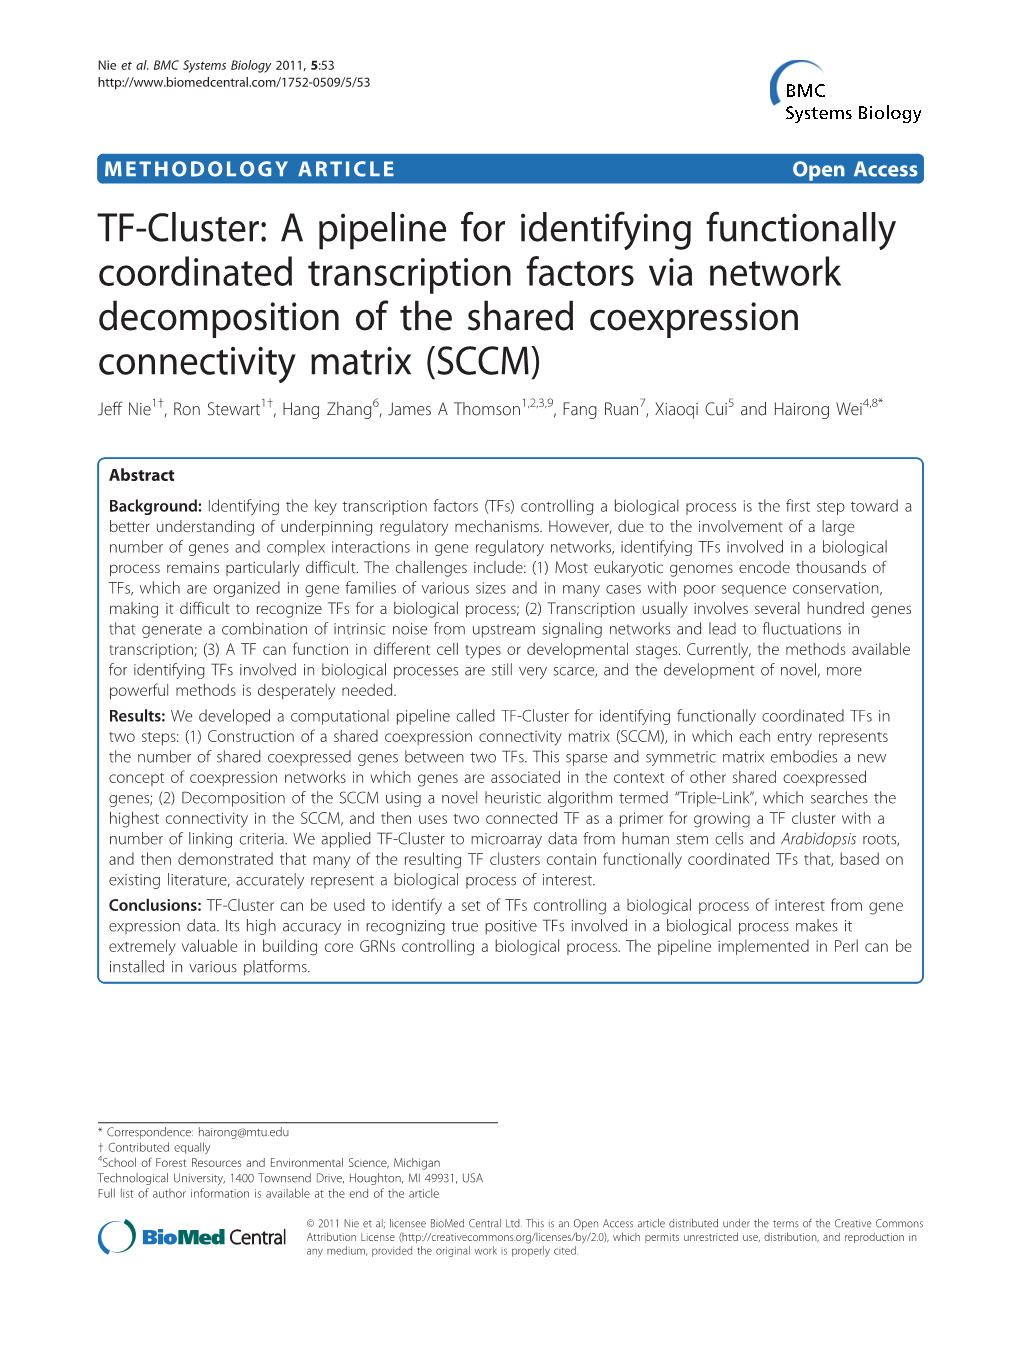 Downloadedfrommultiple from Poplar, and We Could Identify TF Clusters That Can Resources